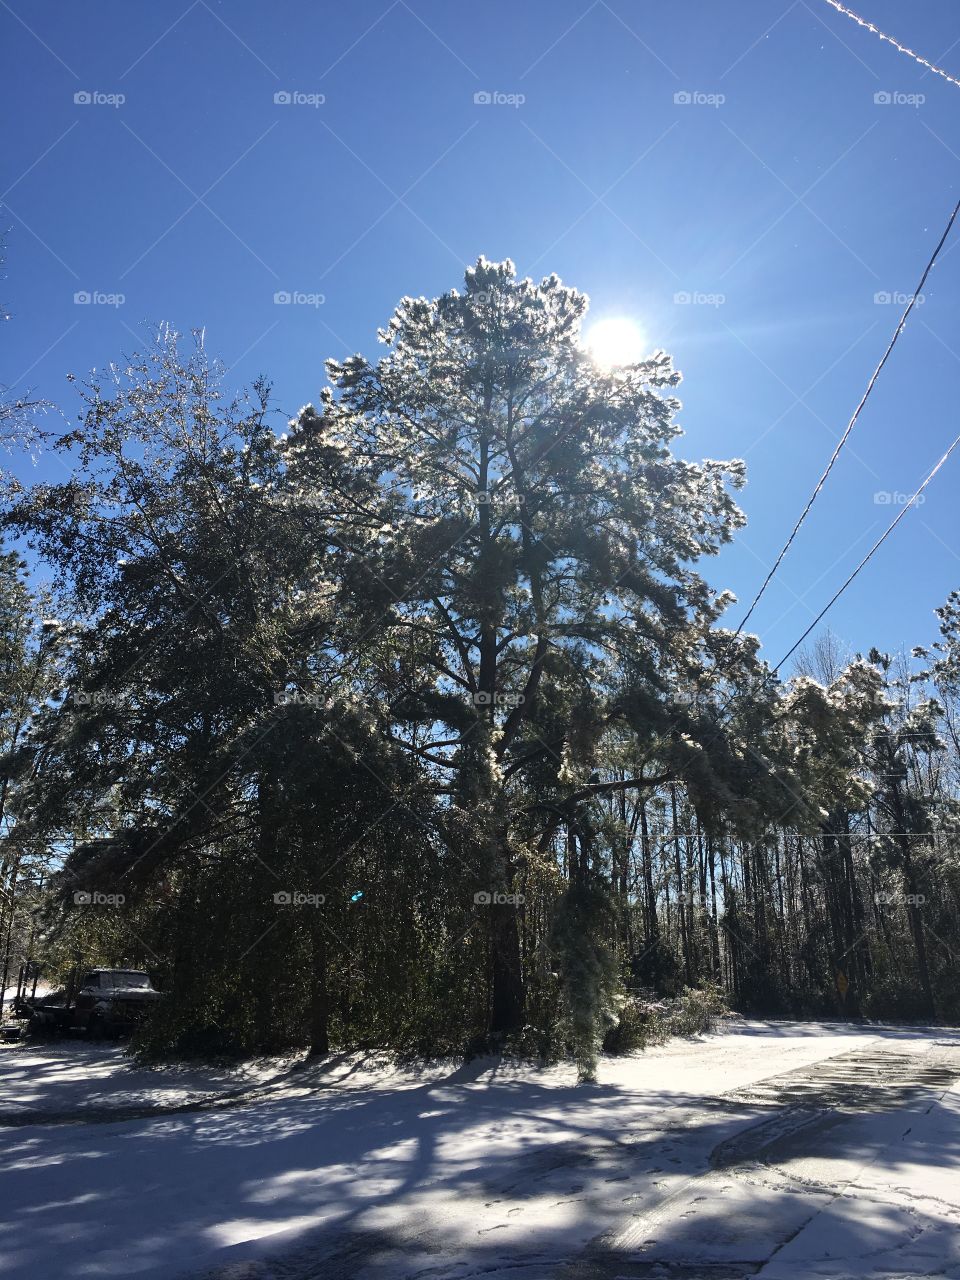 The day after “snow day”! The sun shines different in the south!